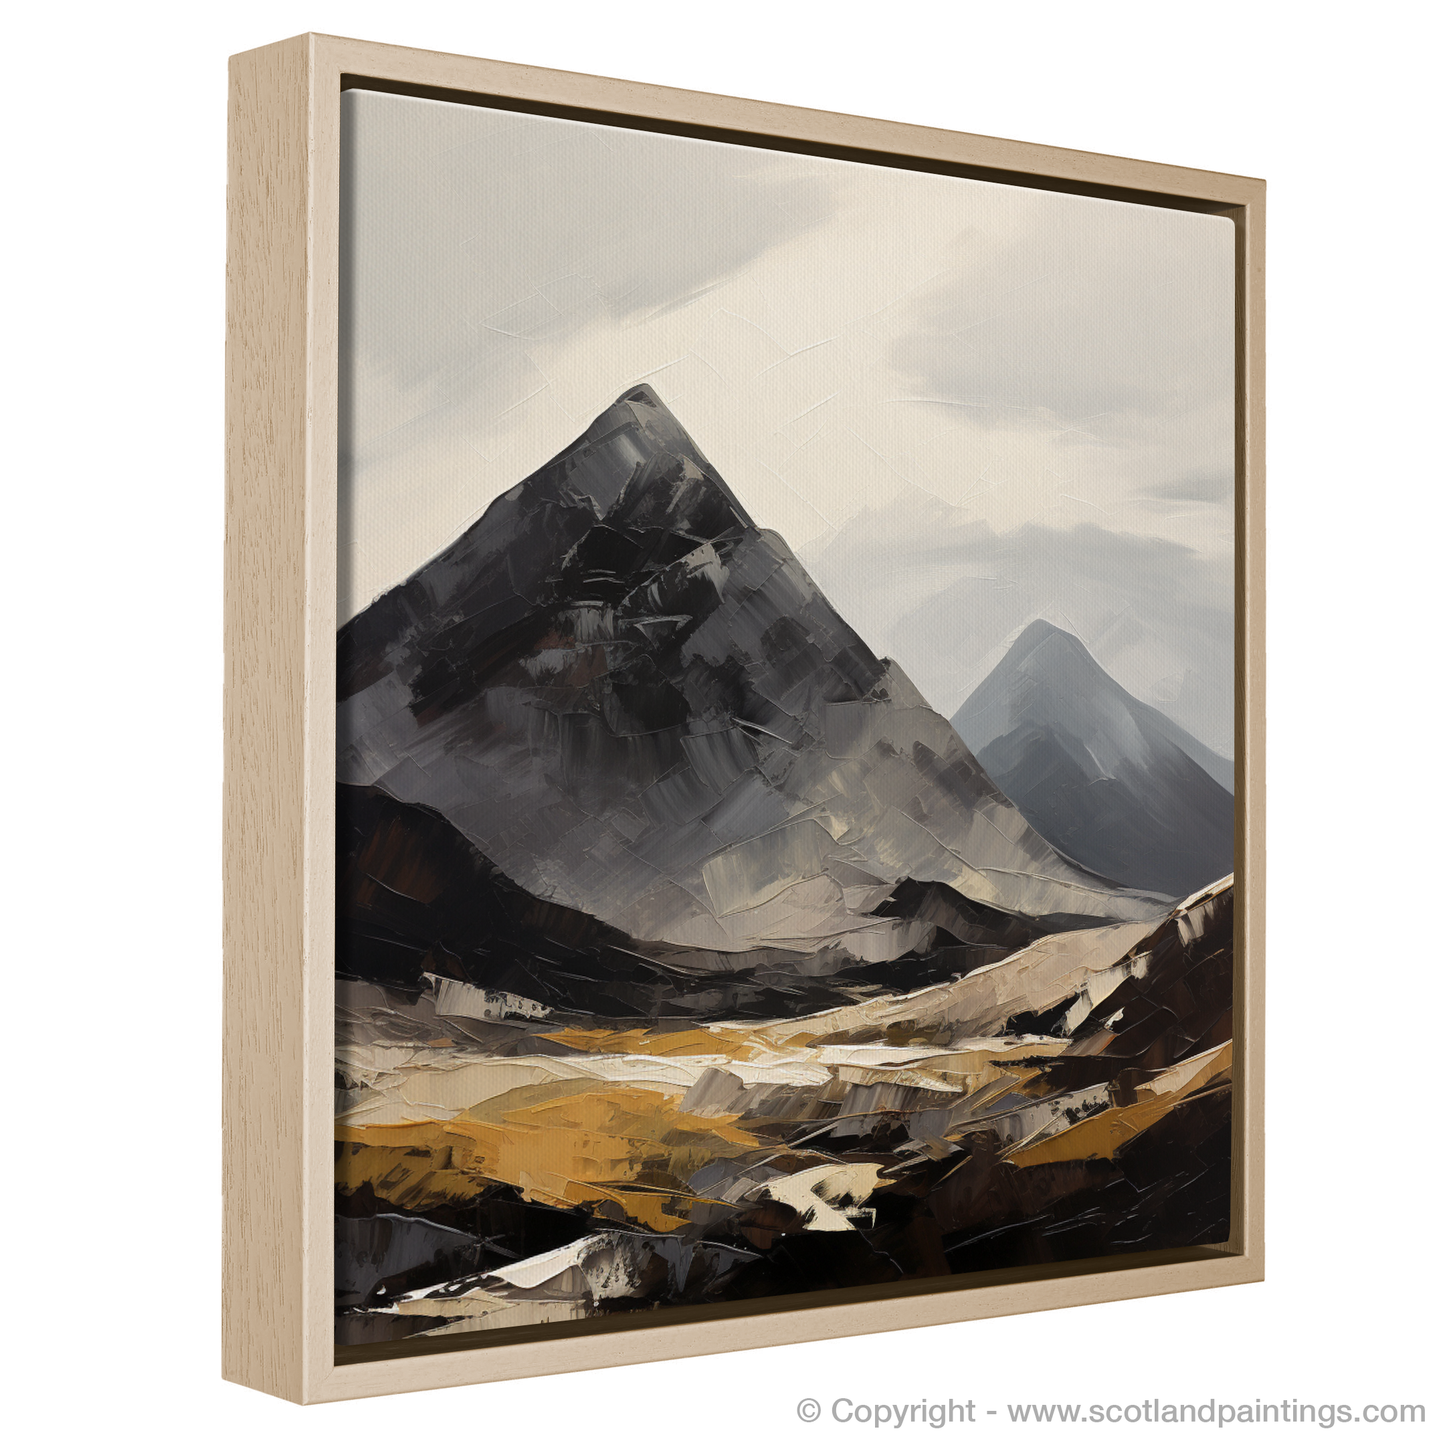 Painting and Art Print of Beinn Ìme entitled "Expressionist Majesty of Beinn Ìme".